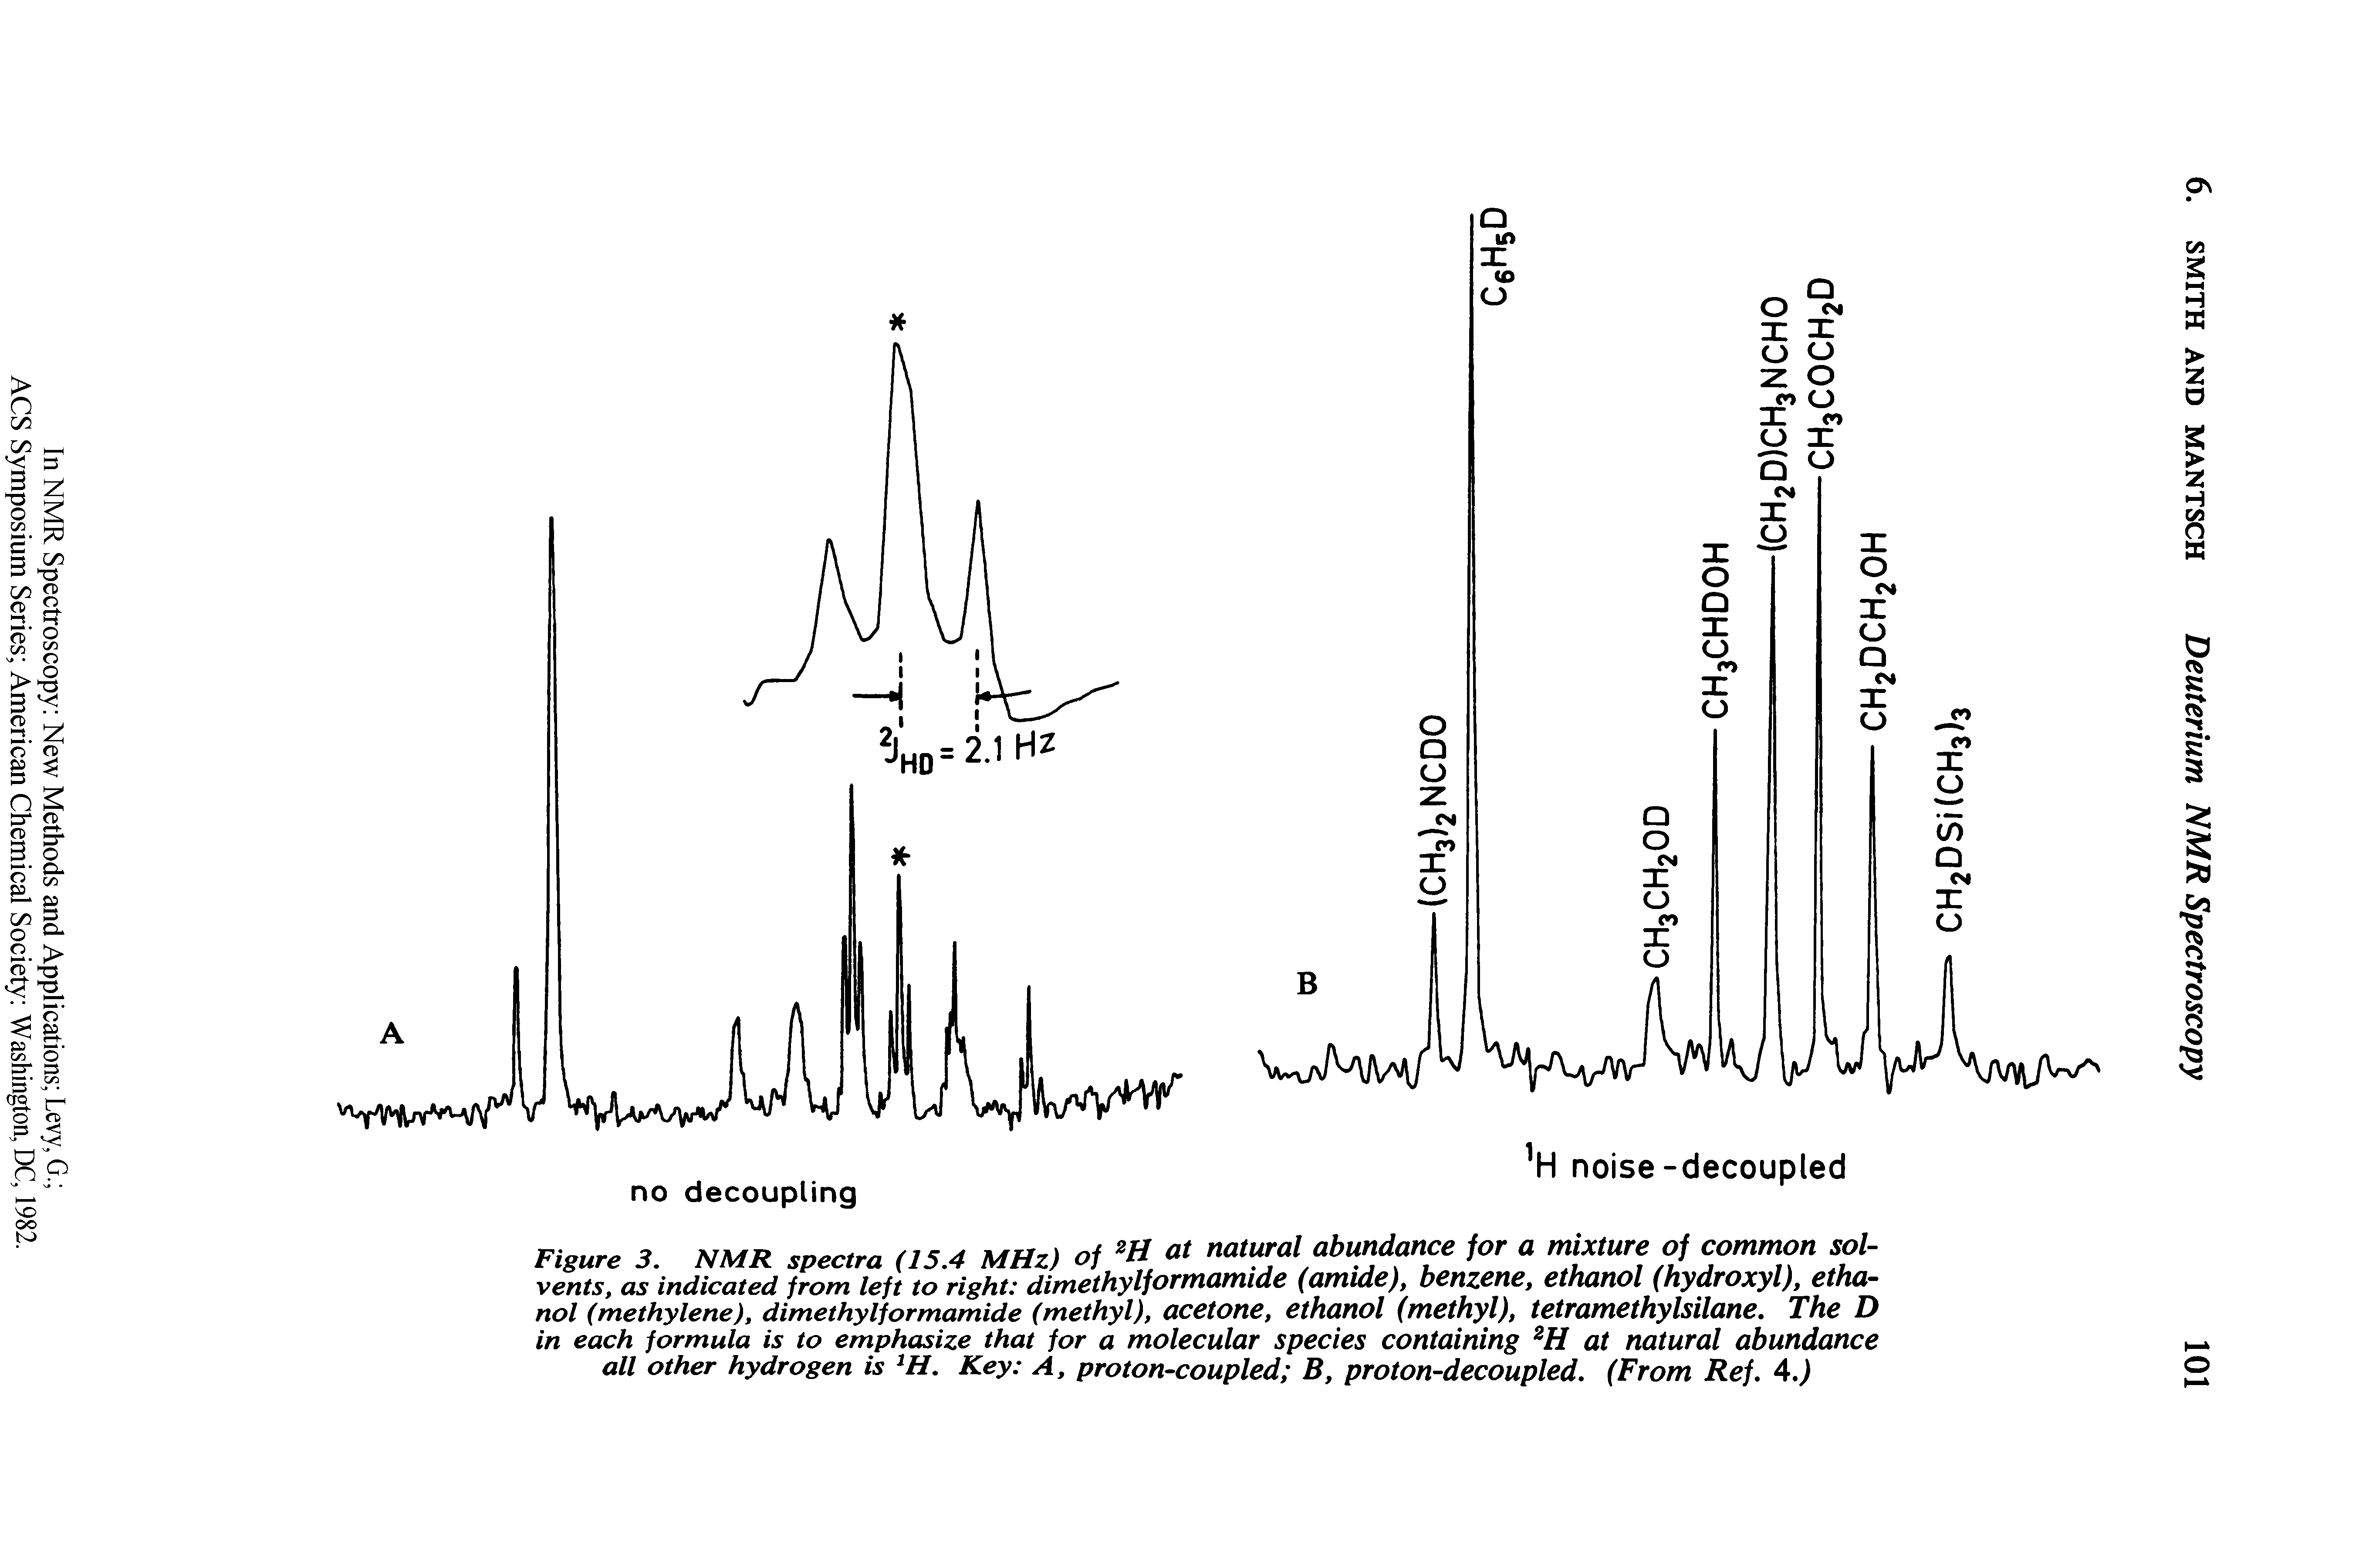 Figure 3. NMR spectra (15.4 MHz) of at natural abundance for a mixture of common solvents, as indicated from left to right dimethylformamide (amide), benzene, ethanol (hydroxyl), ethanol (methylene), dimethylformamide (methyl), acetone, ethanol (methyl), tetramethylsilane. The D in each formula is to emphasize that for a molecular species containing at natural abundance all other hydrogen is Key A, proton-coupled B, proton-decoupled. (From Ref. A.)...